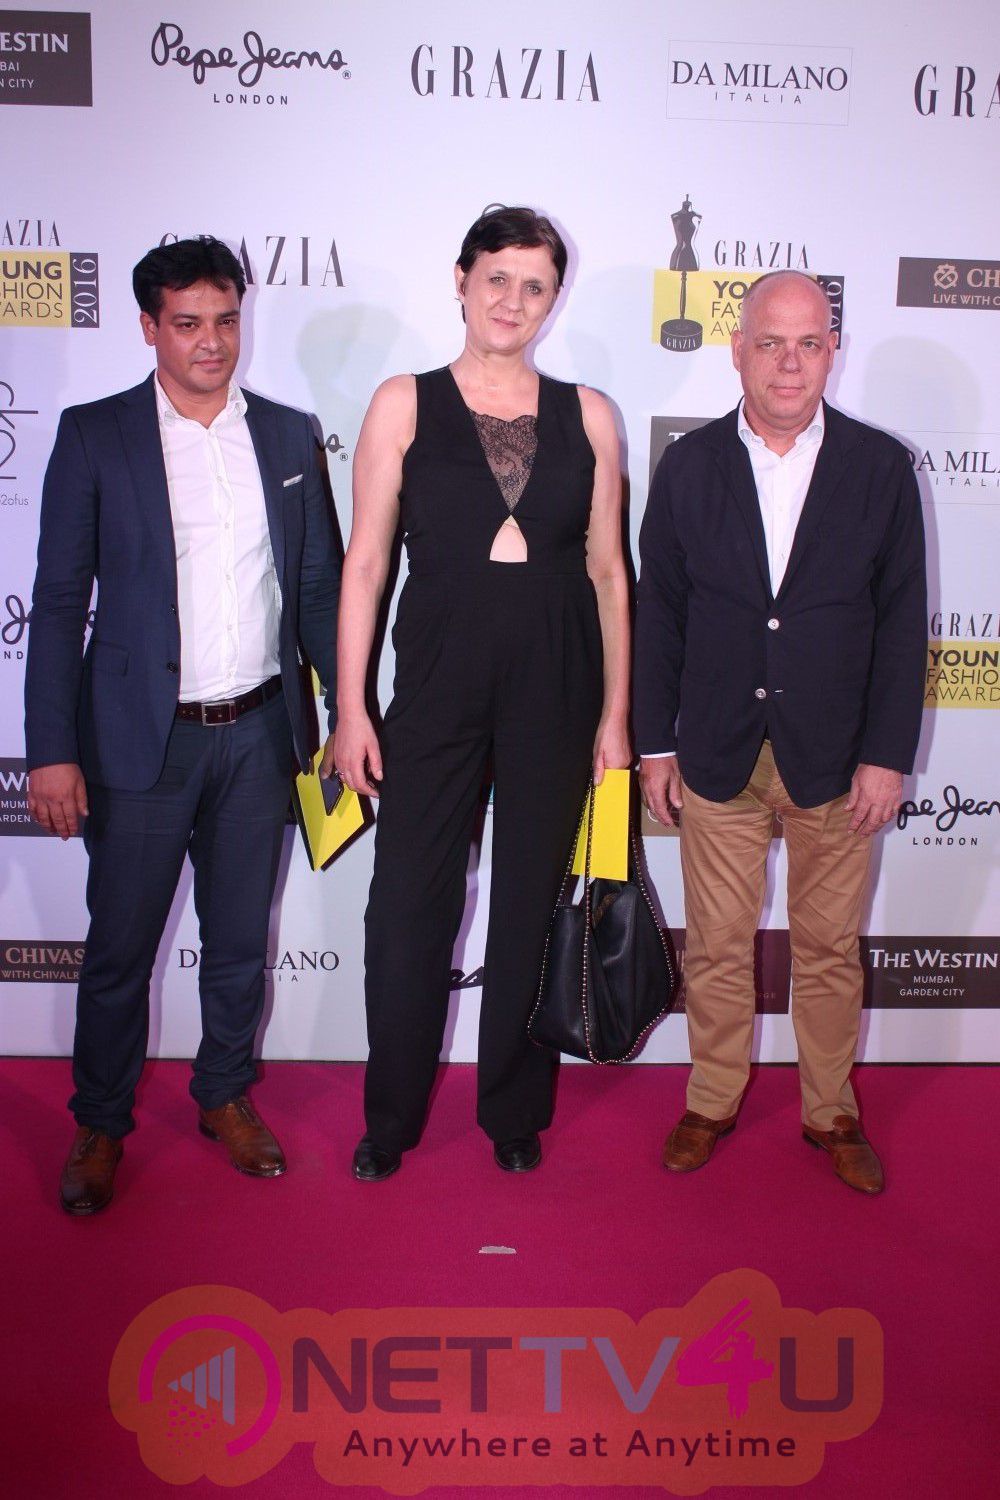 Photos Of Celebrities At The Red Carpet Of 6Th Edition Of The Grazia Young Fashion Awards Held At Westin Mumbai Hindi Ga